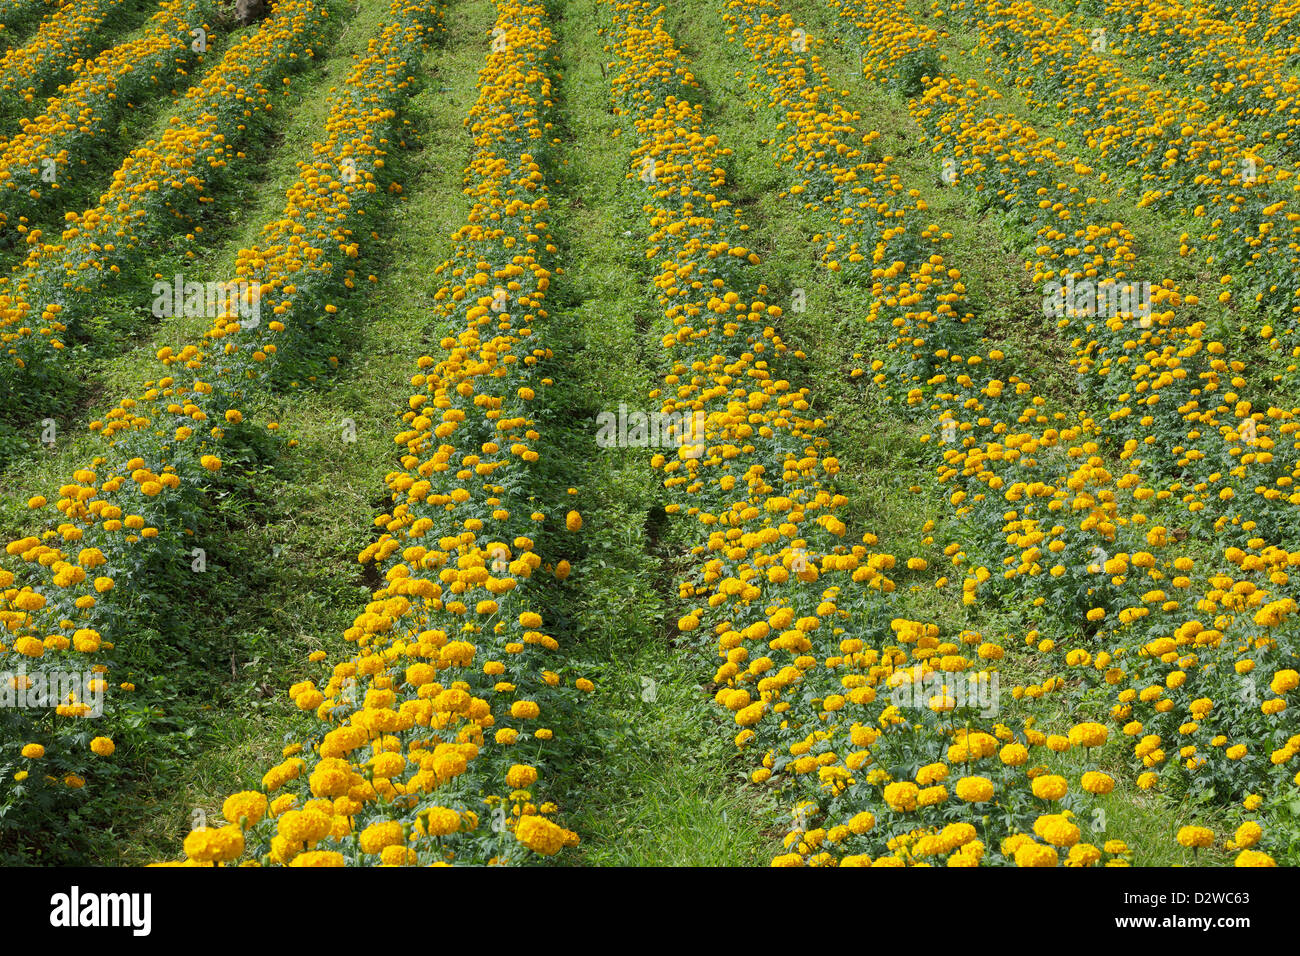 Marigold flower field culture in Umphang province, Thailand Stock Photo